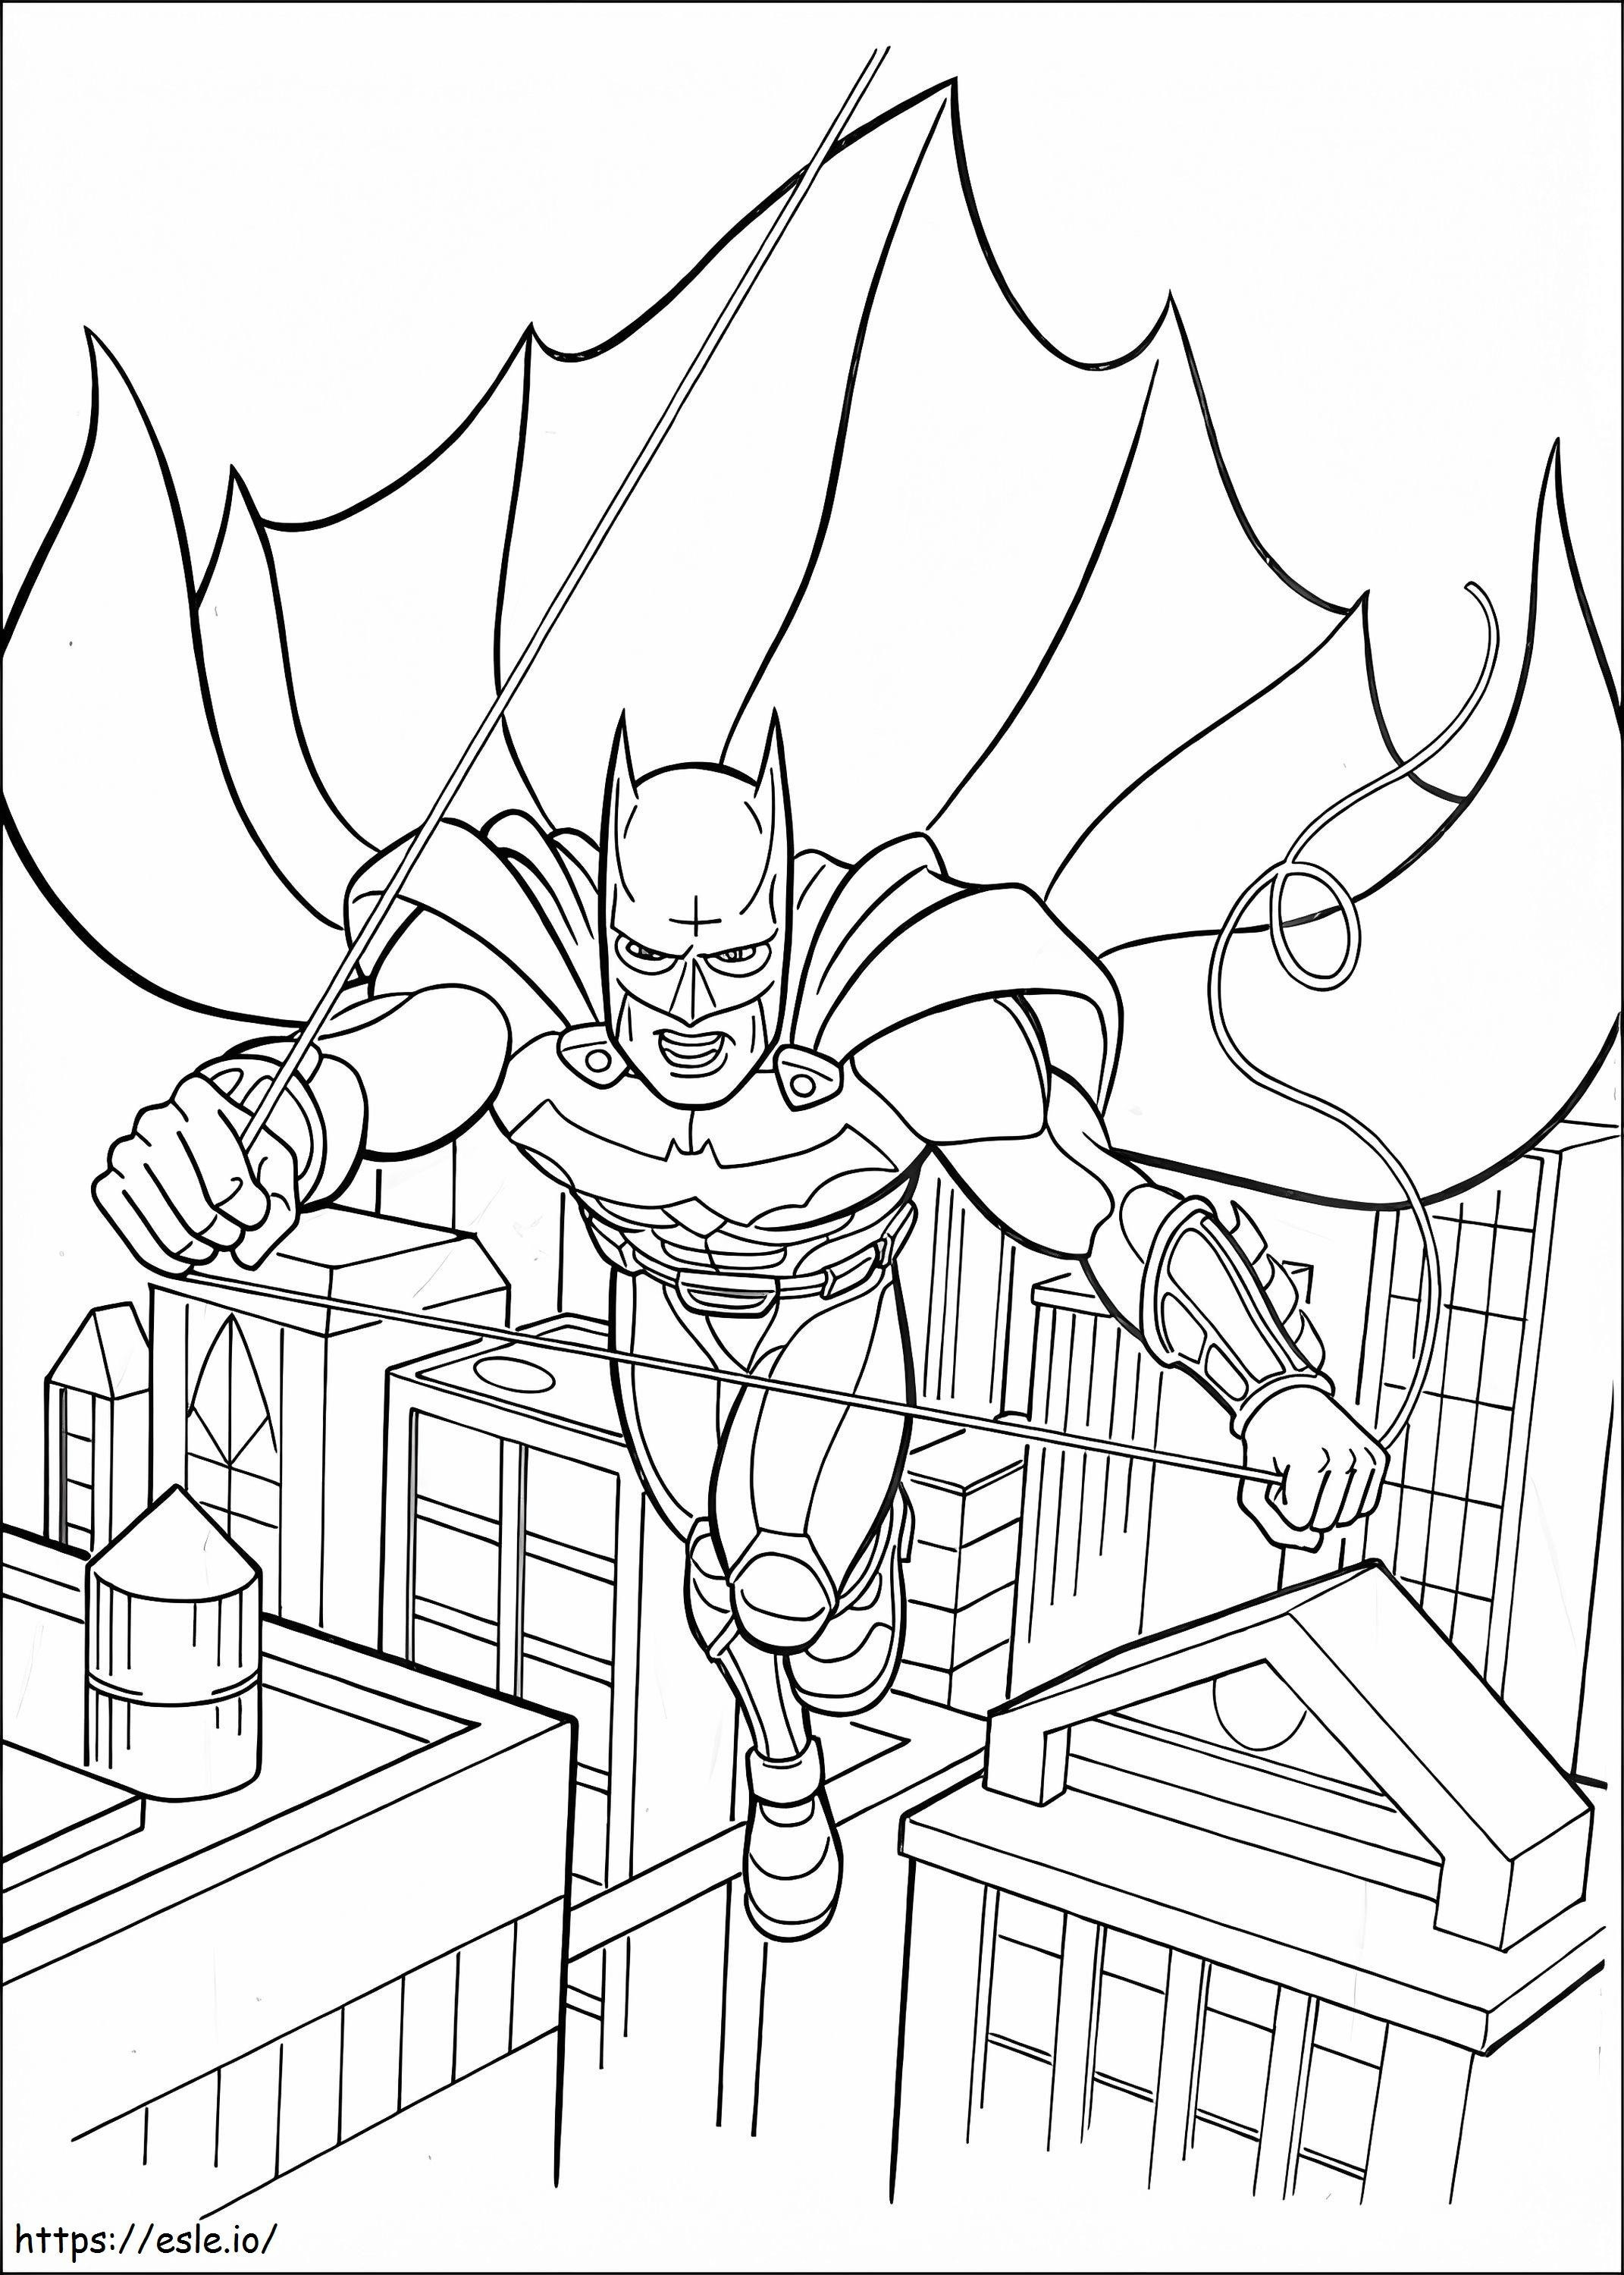 Batman Flying In The City coloring page